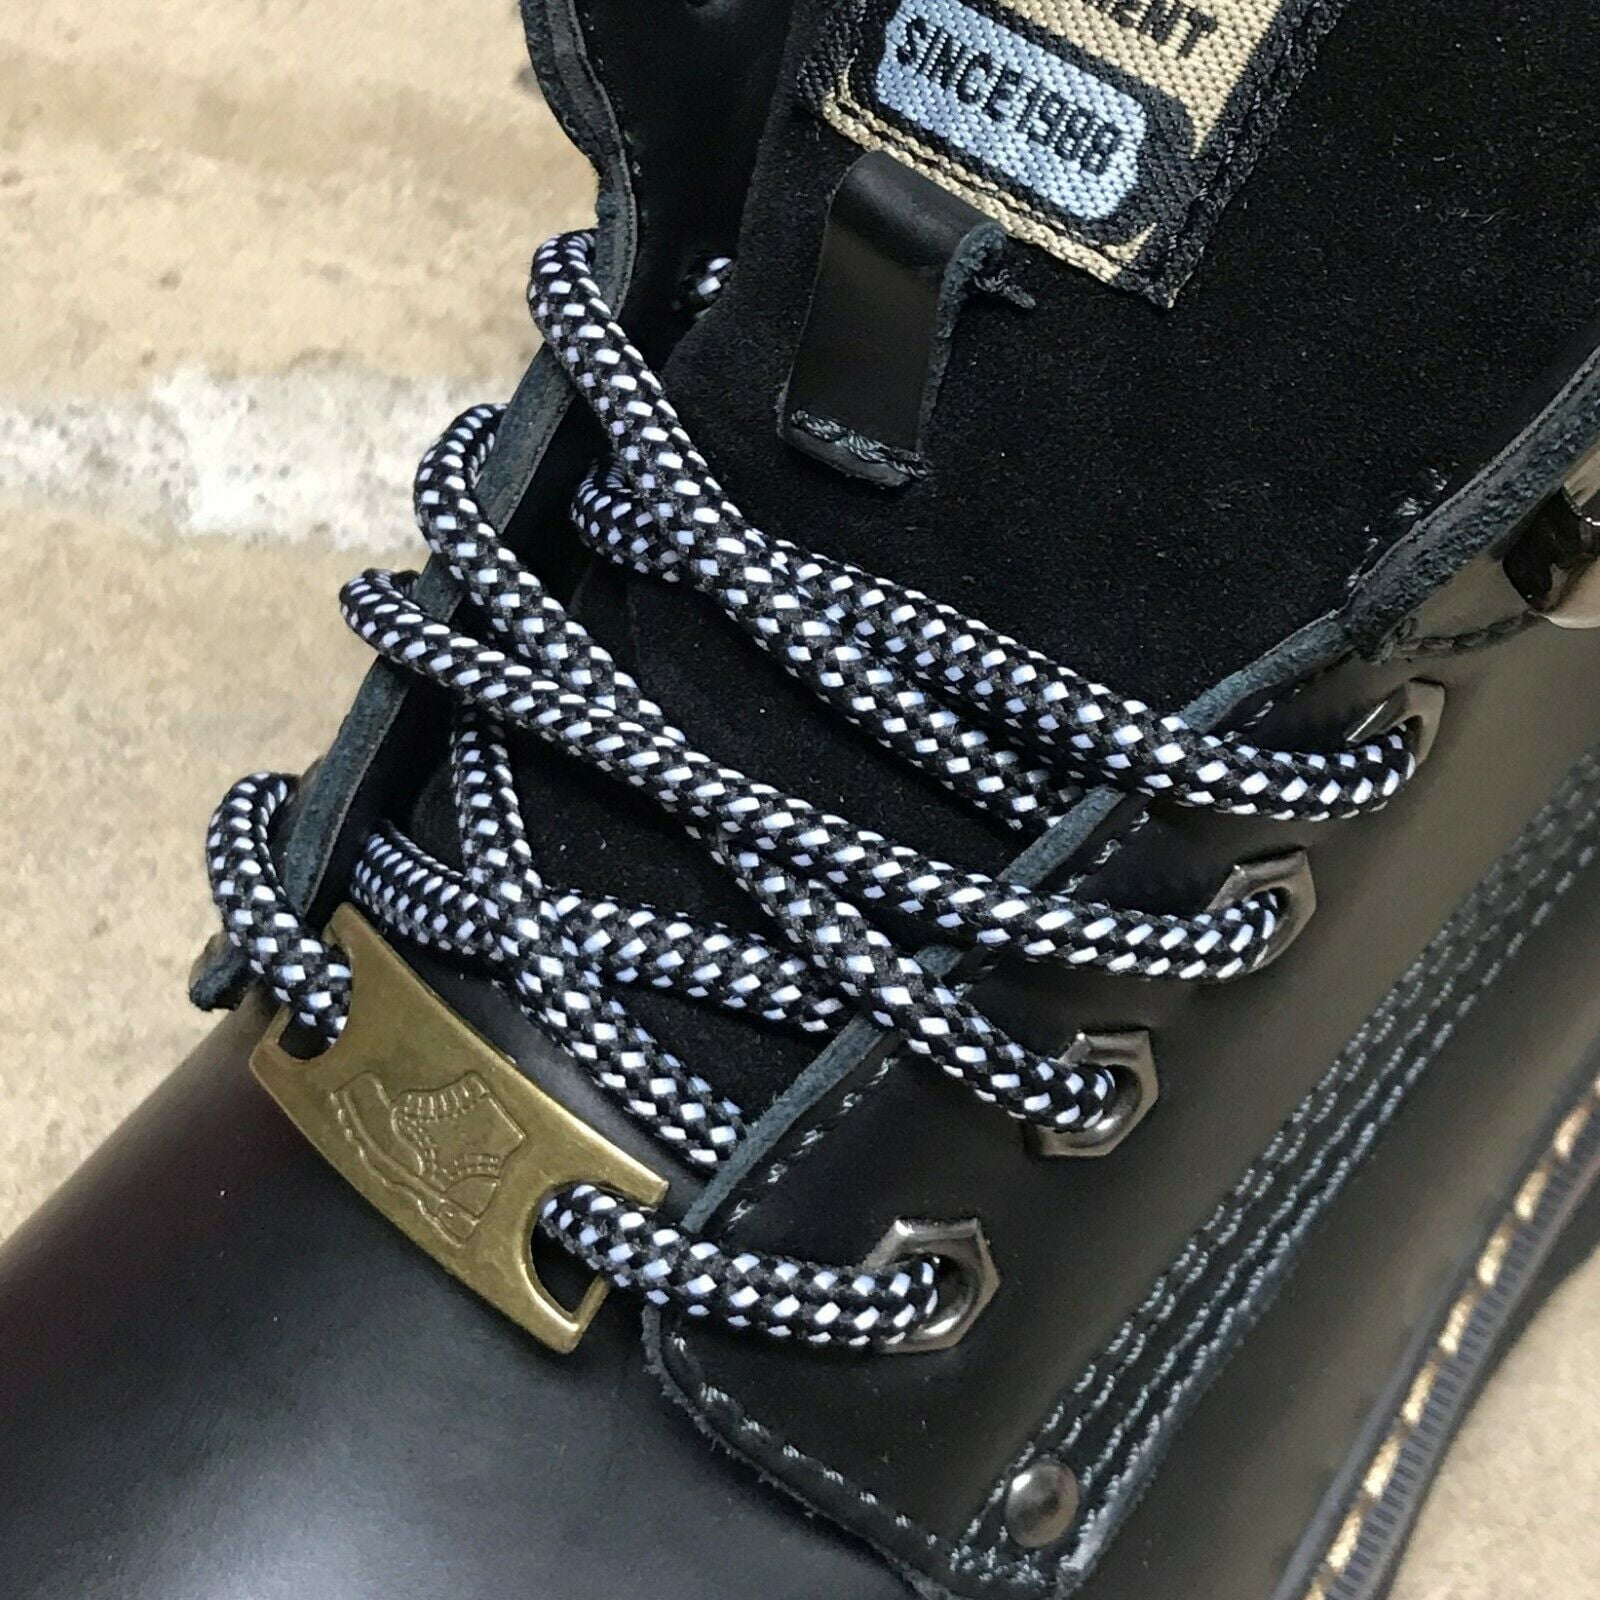 Shoe Laces Round Black White All Sizes Lengths For Shoes Work Boots Boots 